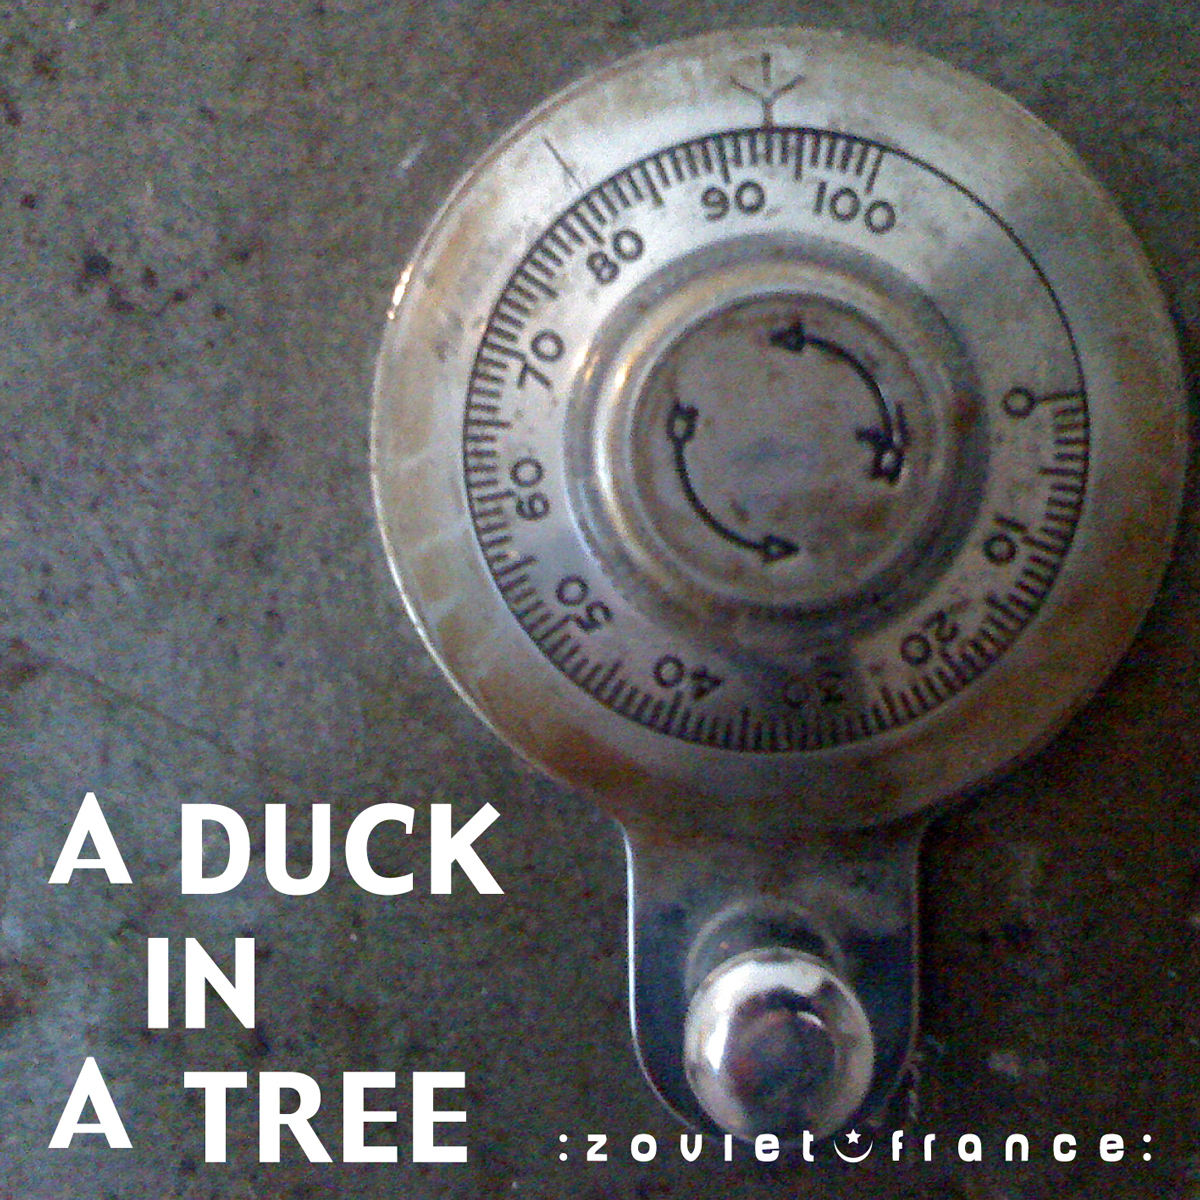 A-Duck-in-a-Tree-2012-09-29-_-Divination-Through-the-Observation-of-Wheels-1200.jpg